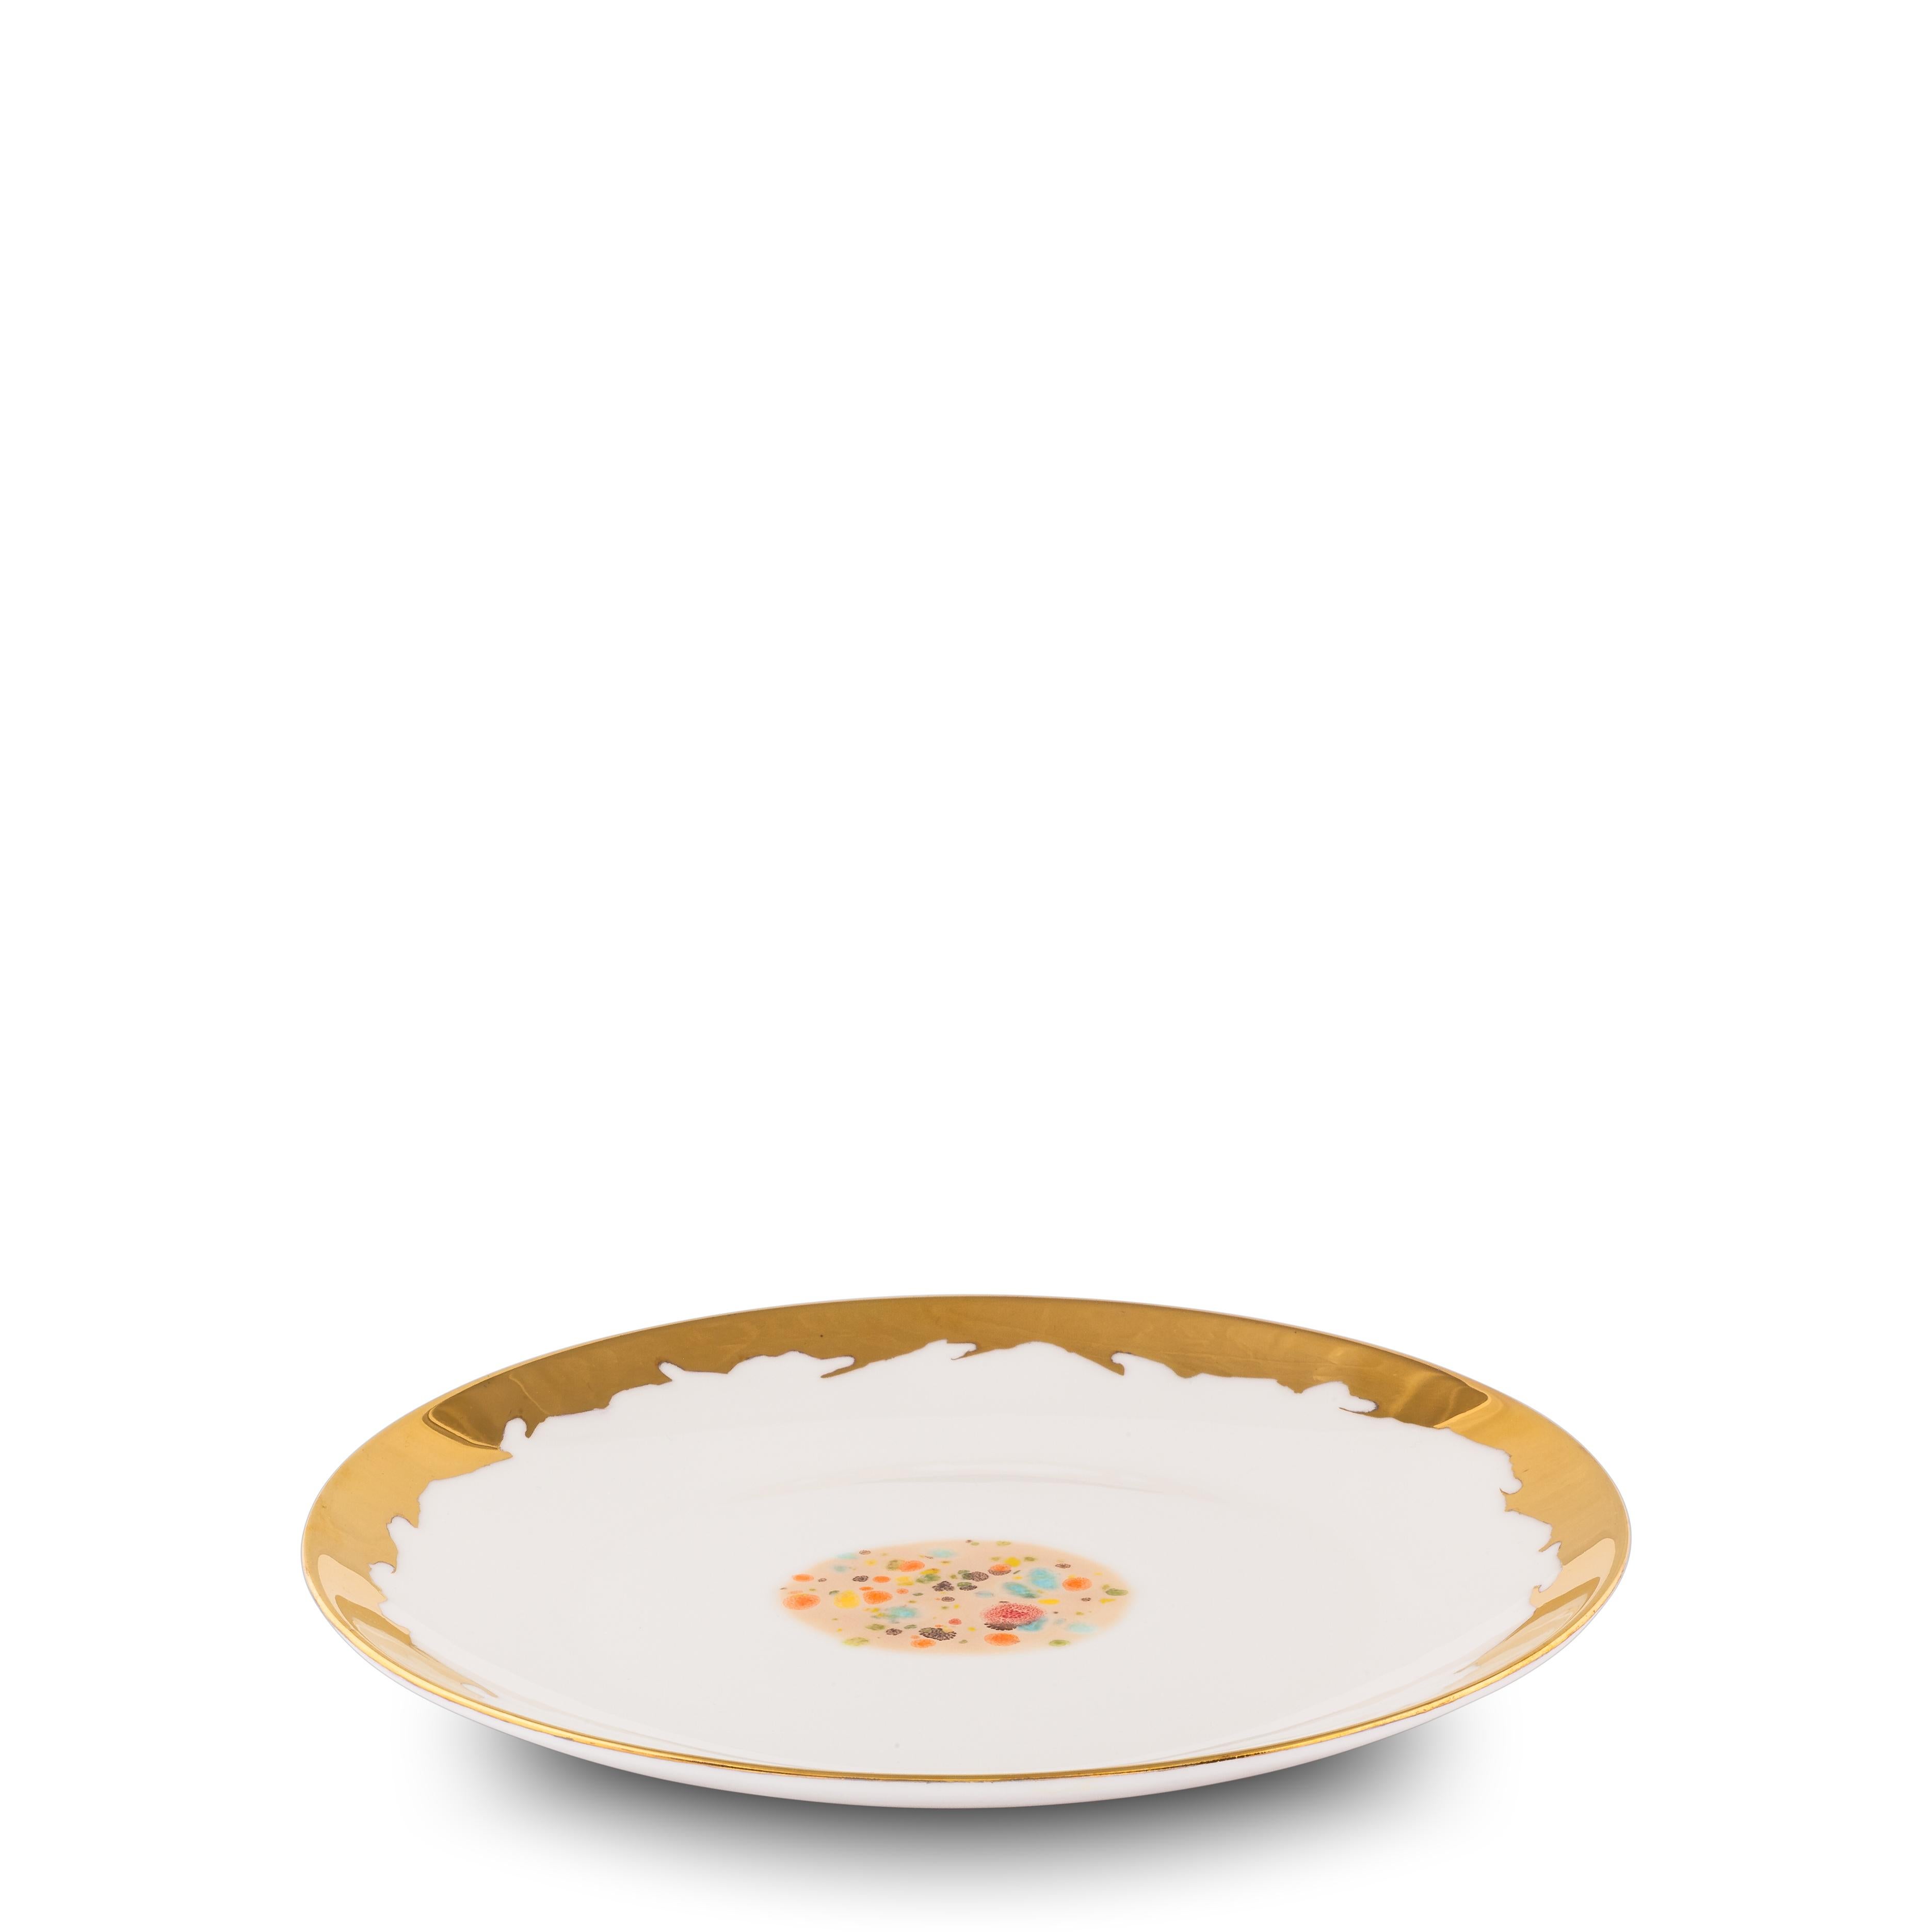 Handcrafted in Italy from the finest porcelain, these white drop edge dessert coupe plates from the Chestnut collection have an original golden drop edge decoration emphasizing the elegant white surface with the sandy, dotted décor at the center.